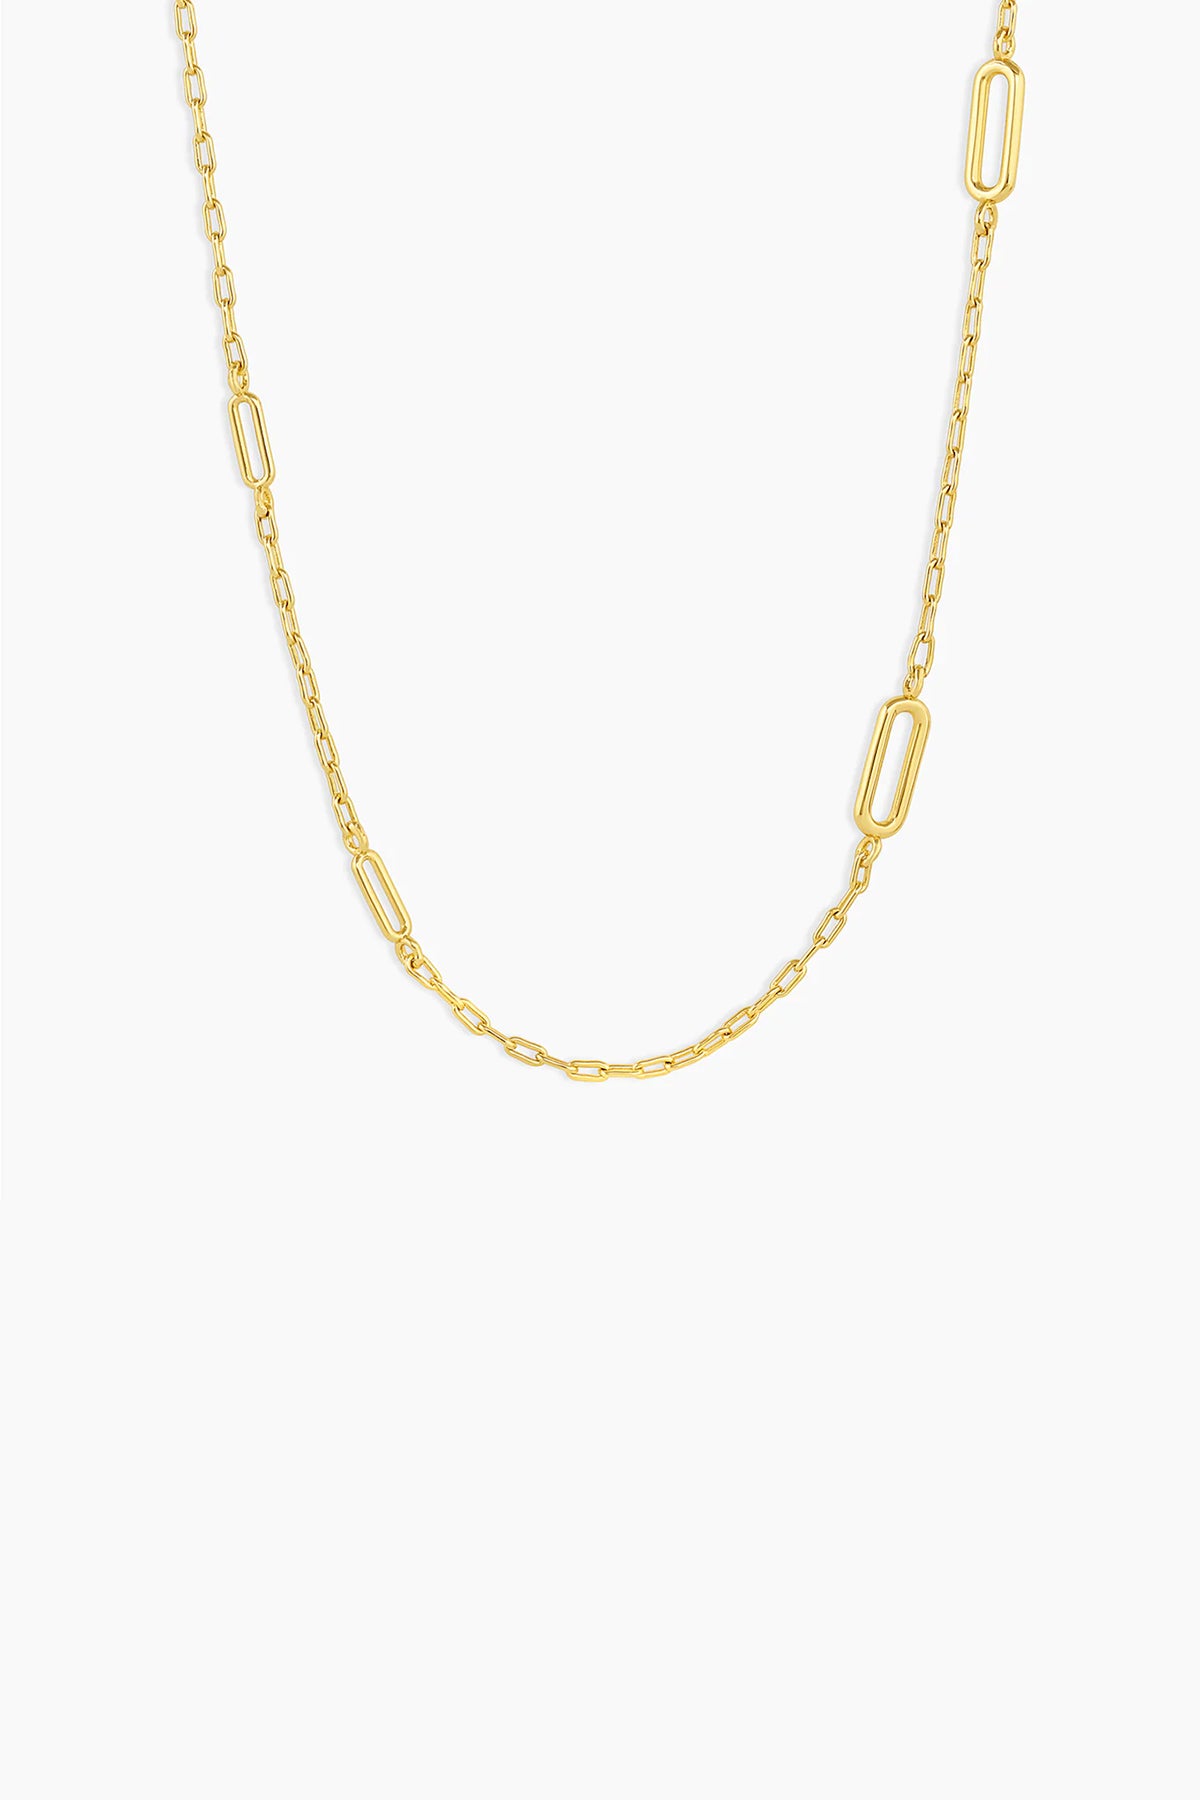 Women' Business Zoey Necklace - Gold NORA GARDNER | OFFICIAL STORE for work and office